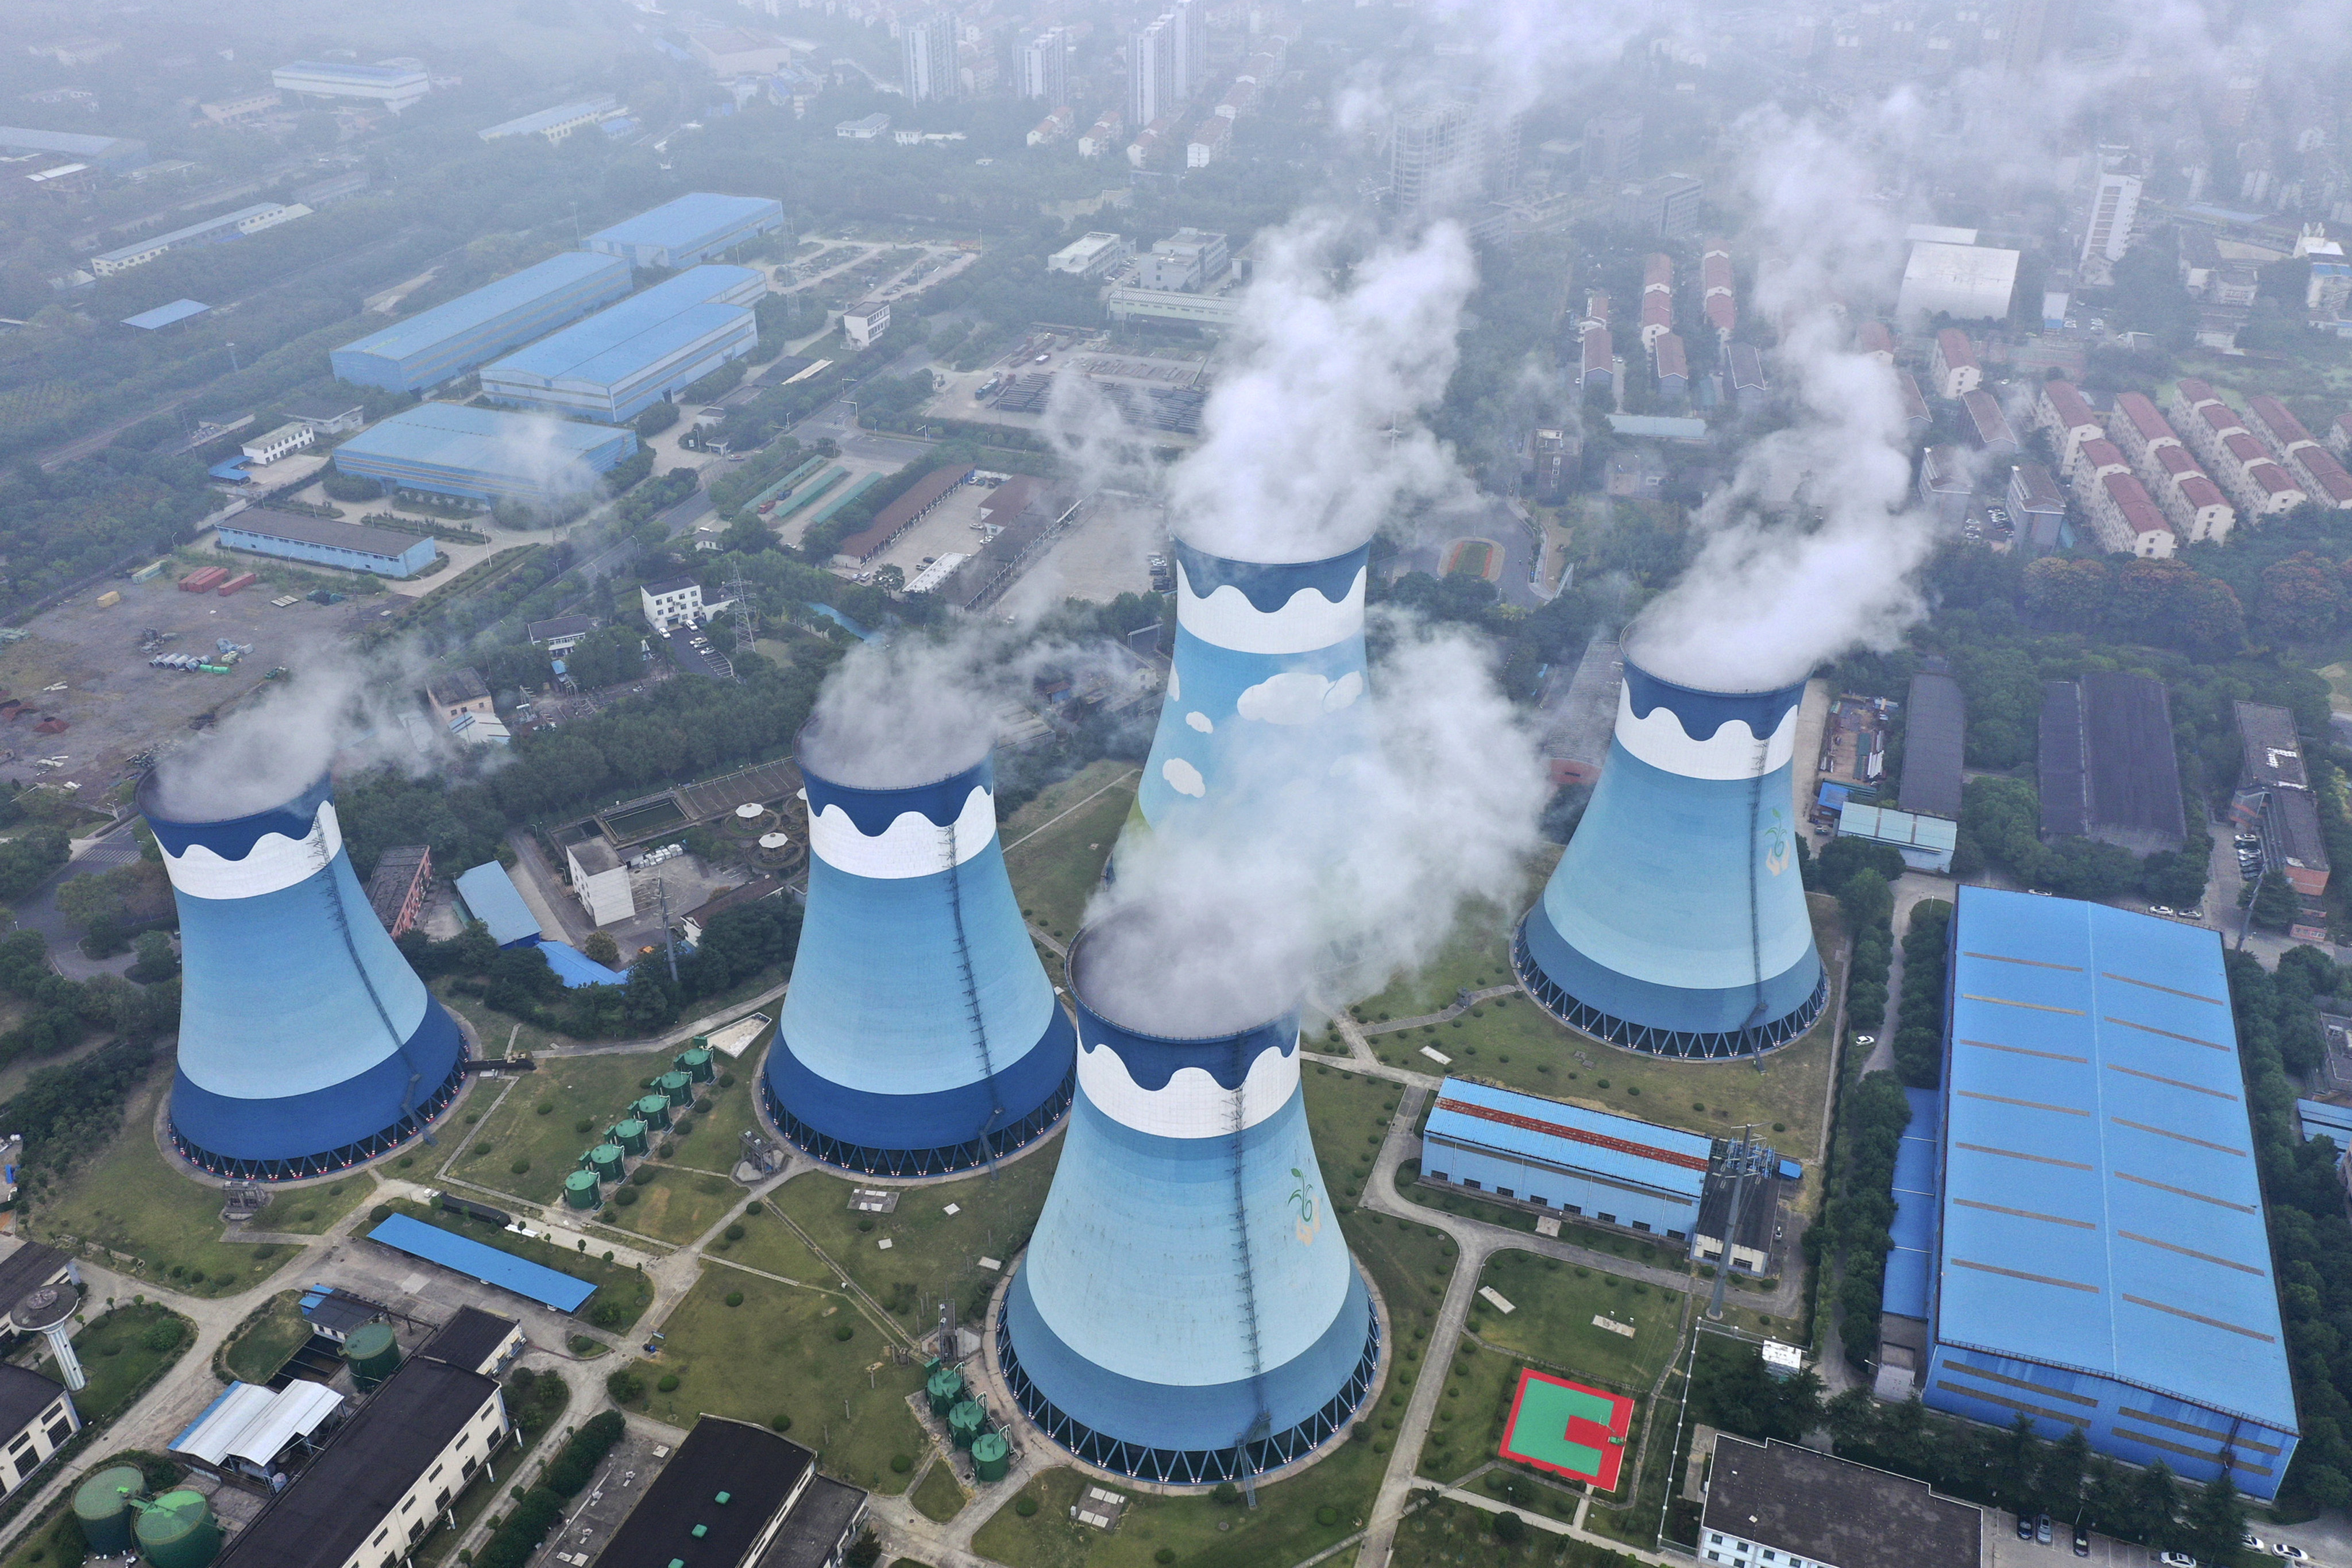 China now says it needs to “strike a balance” between development and carbon-emission reductions, as the latter are being blamed for power shortages in recent years. Photo: AP